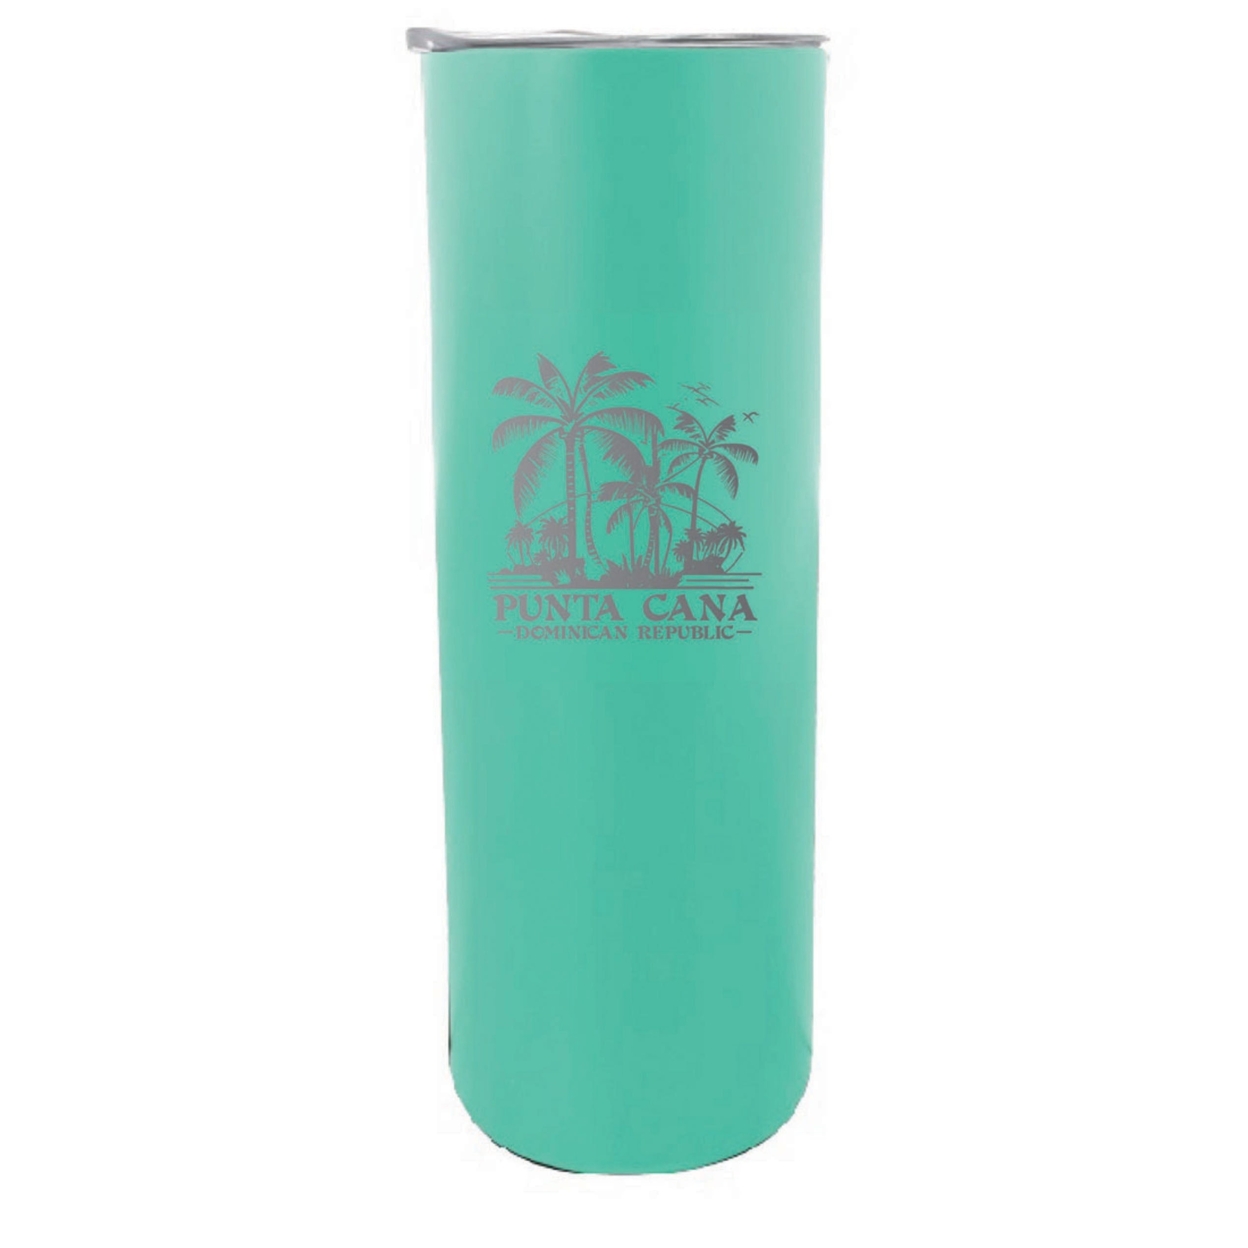 Punta Cana Dominican Republic Souvenir 20 Oz Insulated Stainless Steel Skinny Tumbler Etched - Black, PALMS